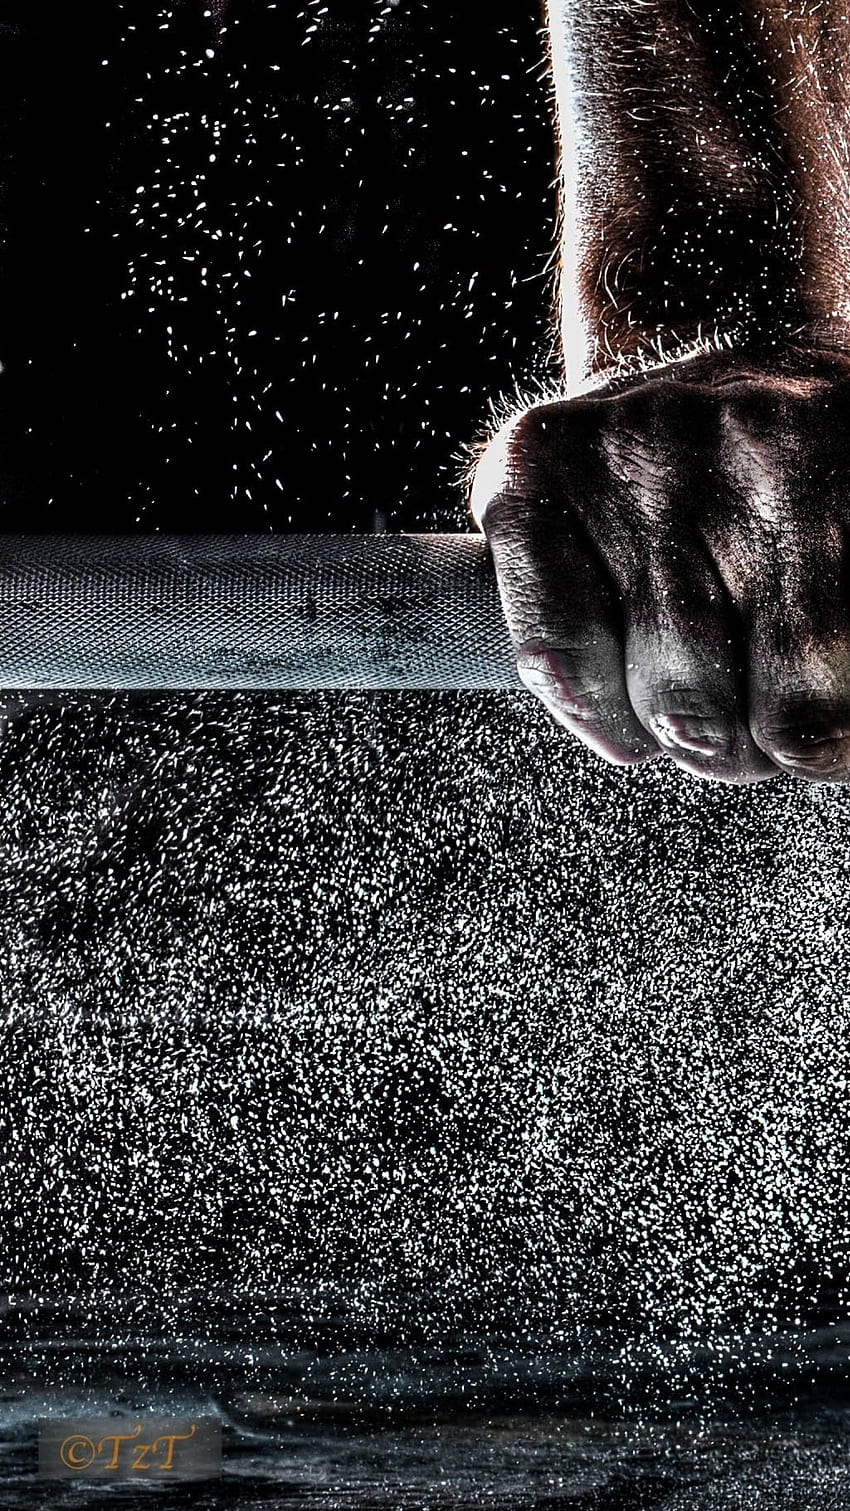 A man's hand on a barbell, with water droplets falling from above - Gym